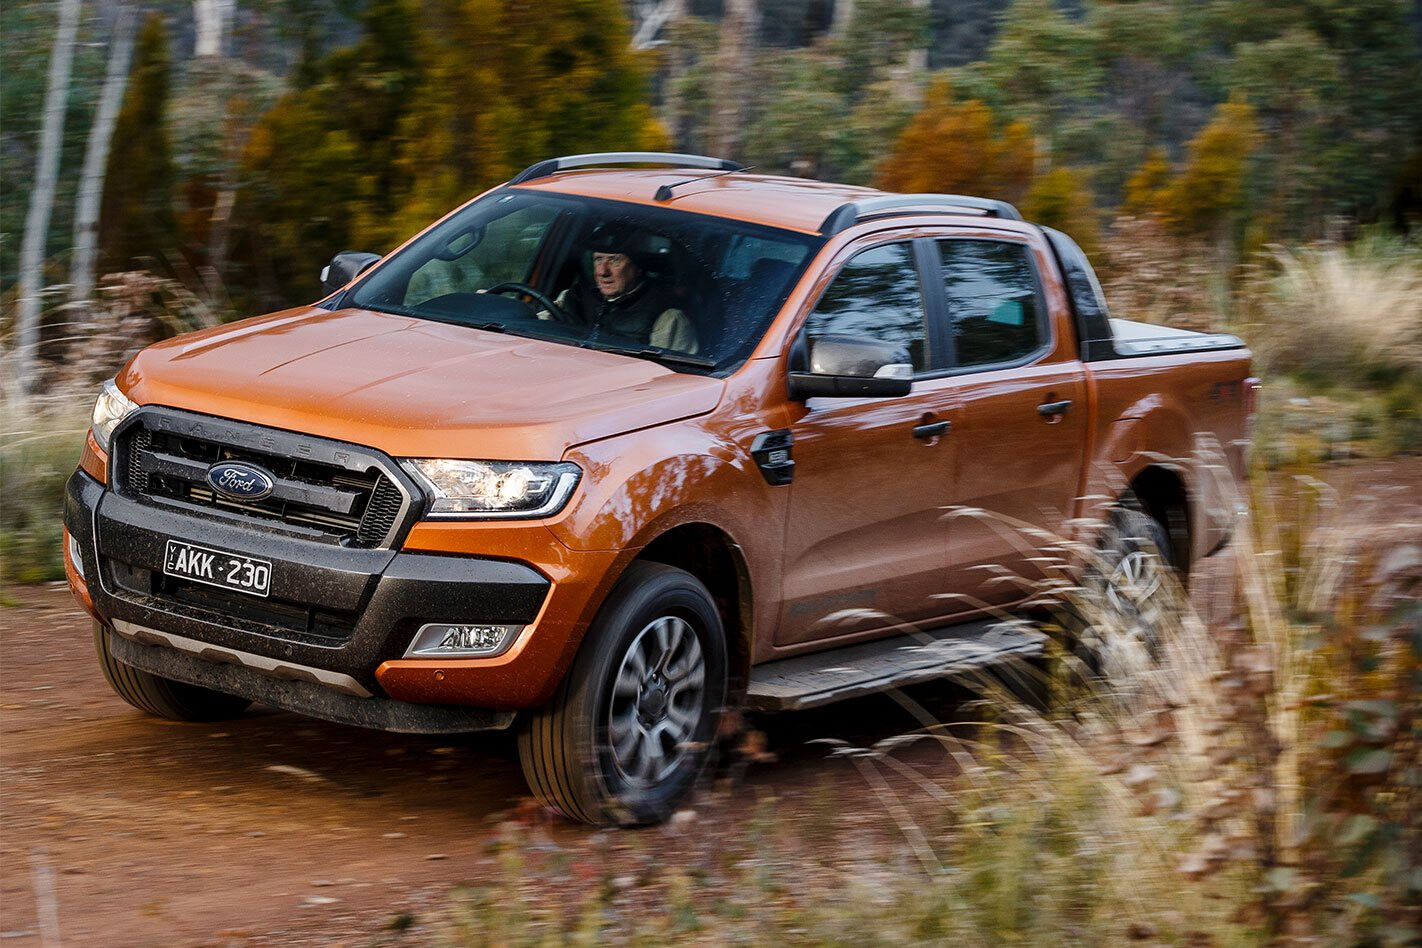 Ford Ranger recalled due to fire risk